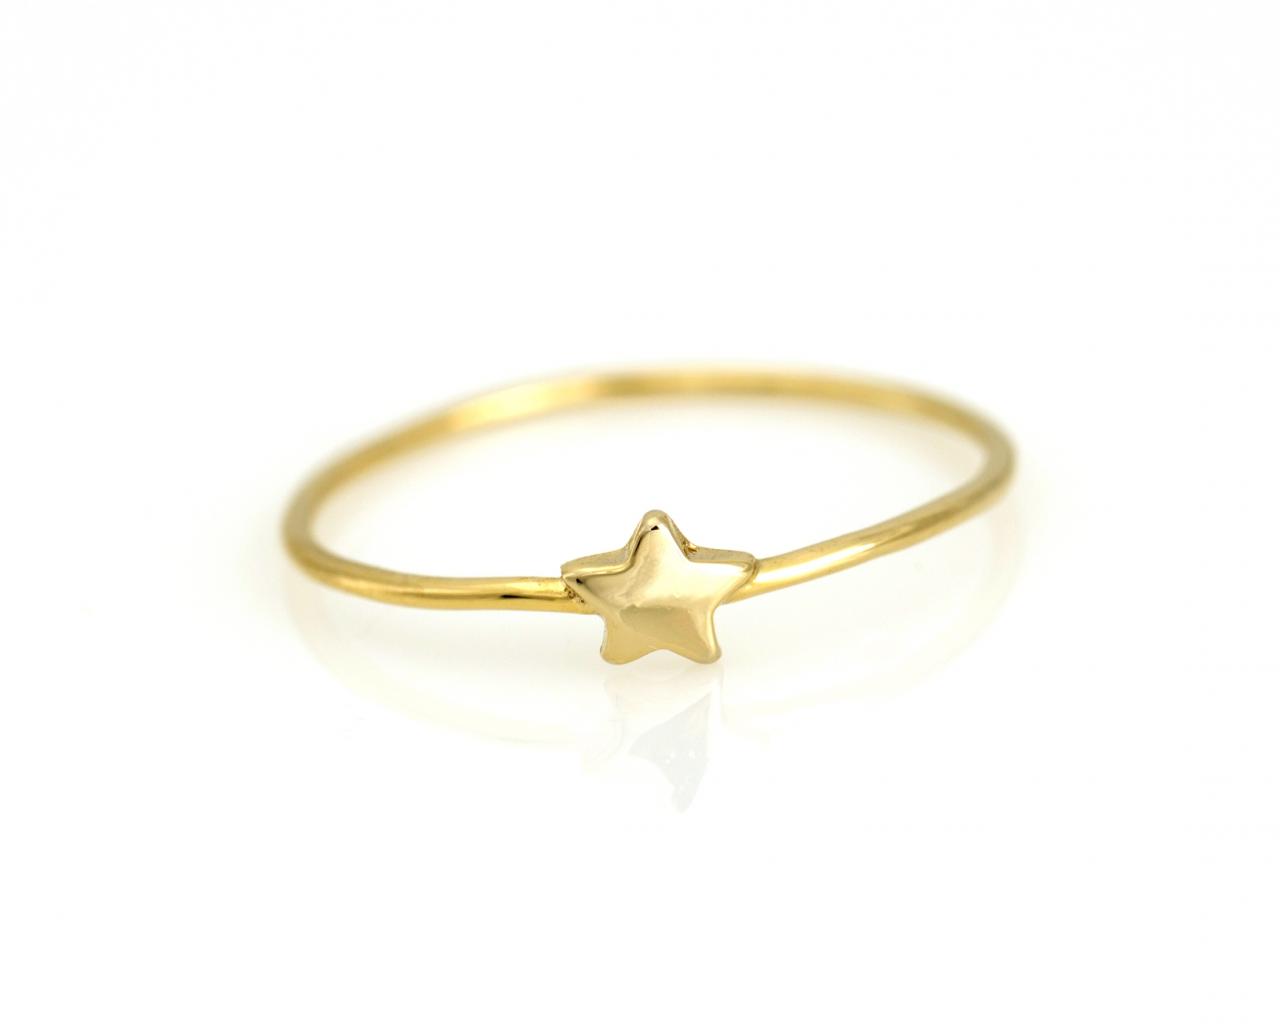 1 Star Ring Delicate Shiny Ring Gold Plated Over Brass 5nbar11